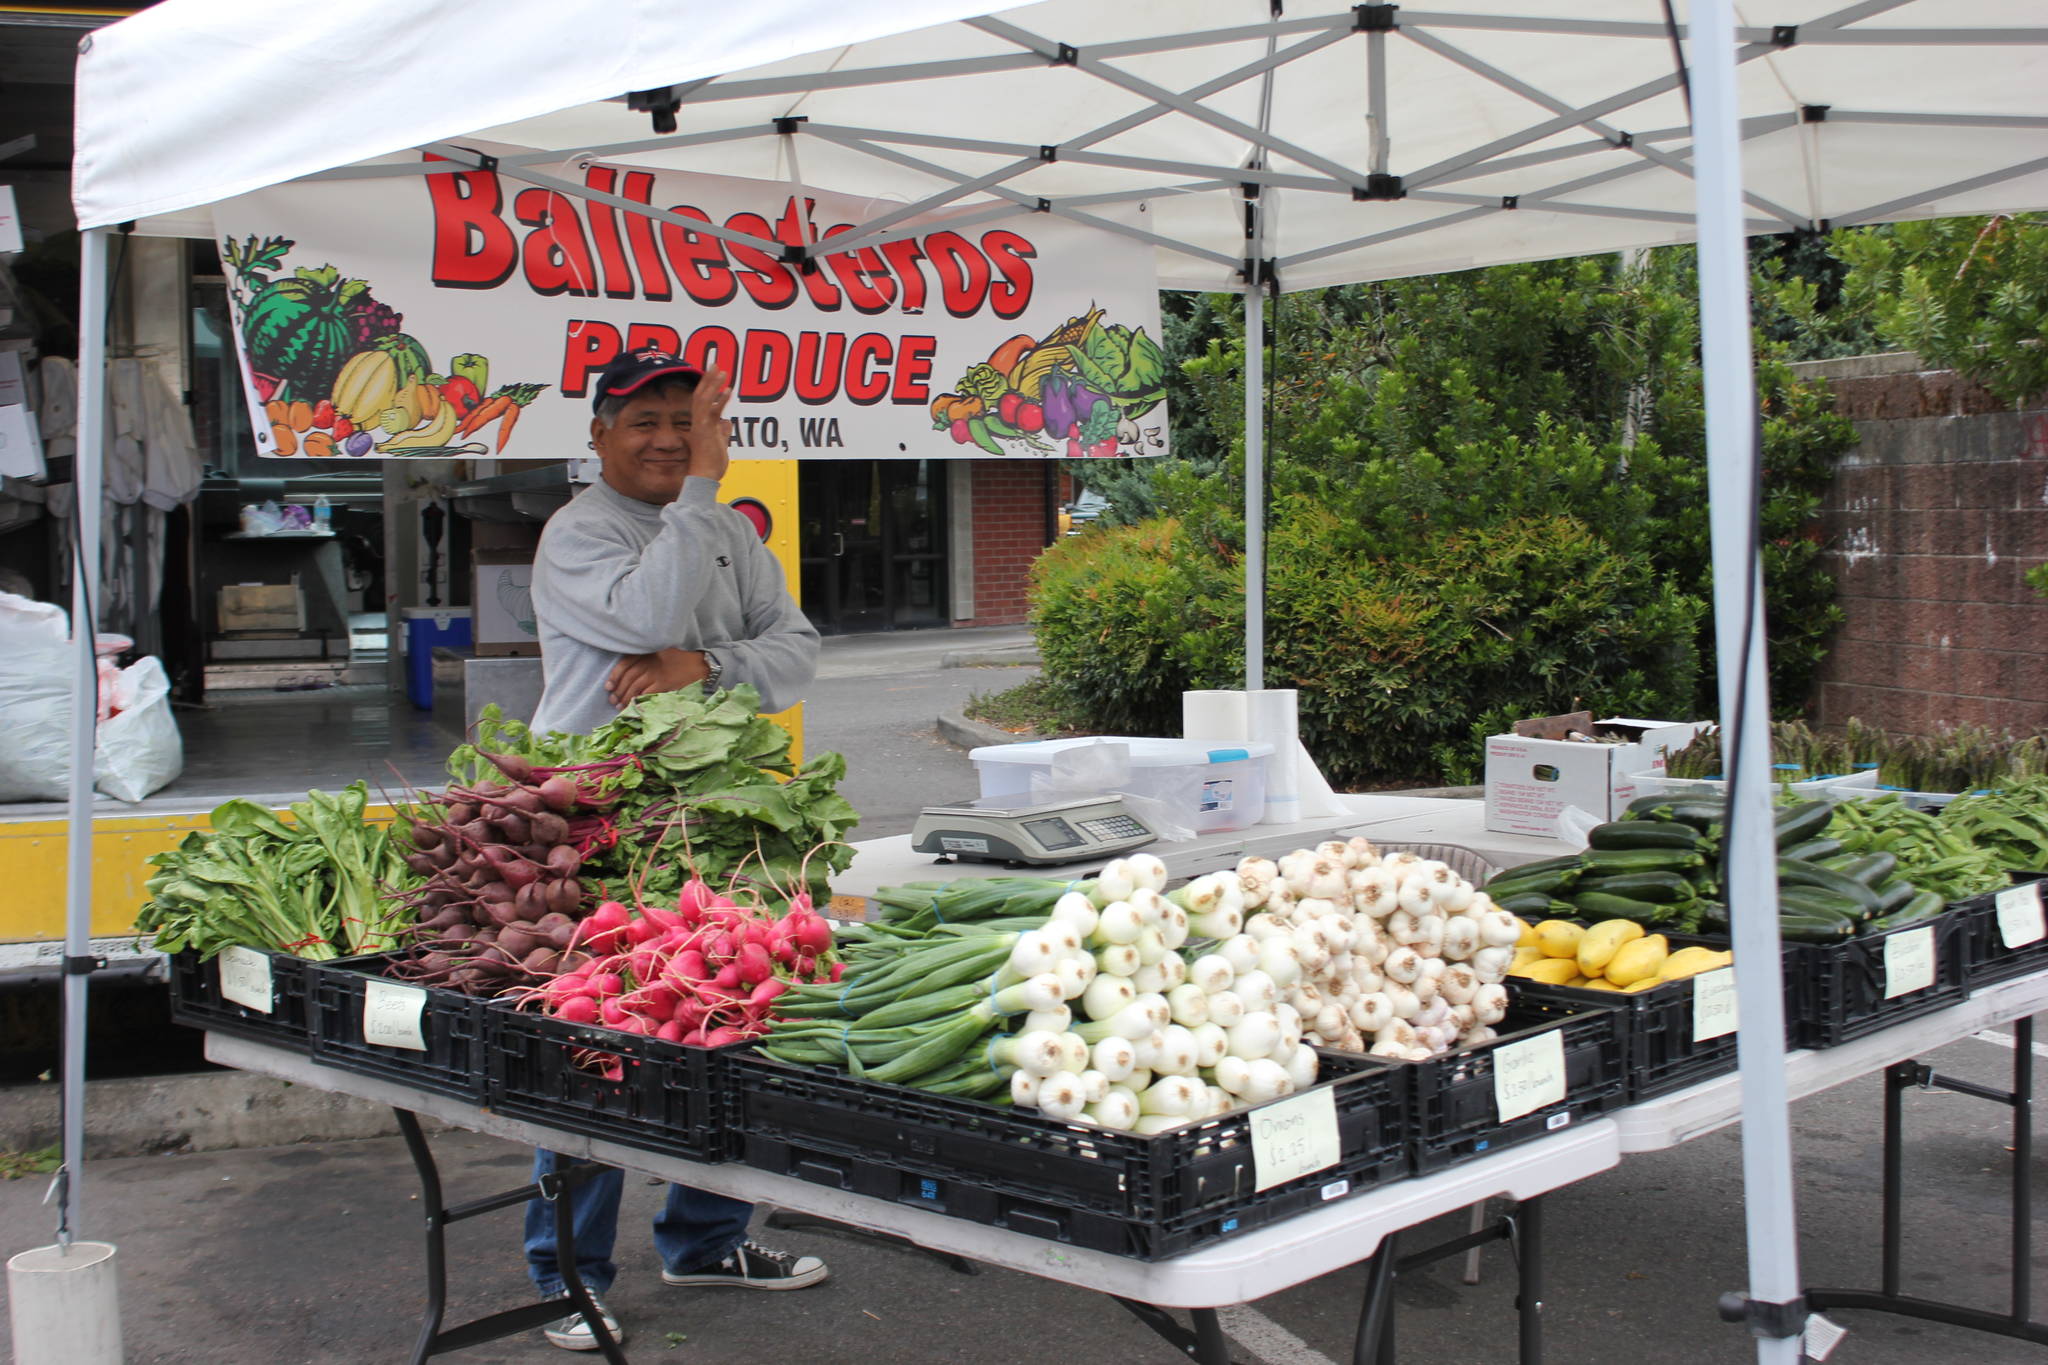 Courtesy photo                                 In this image from the 2019 Auburn Farmers Market, Ballesteros Produce displays its goods.